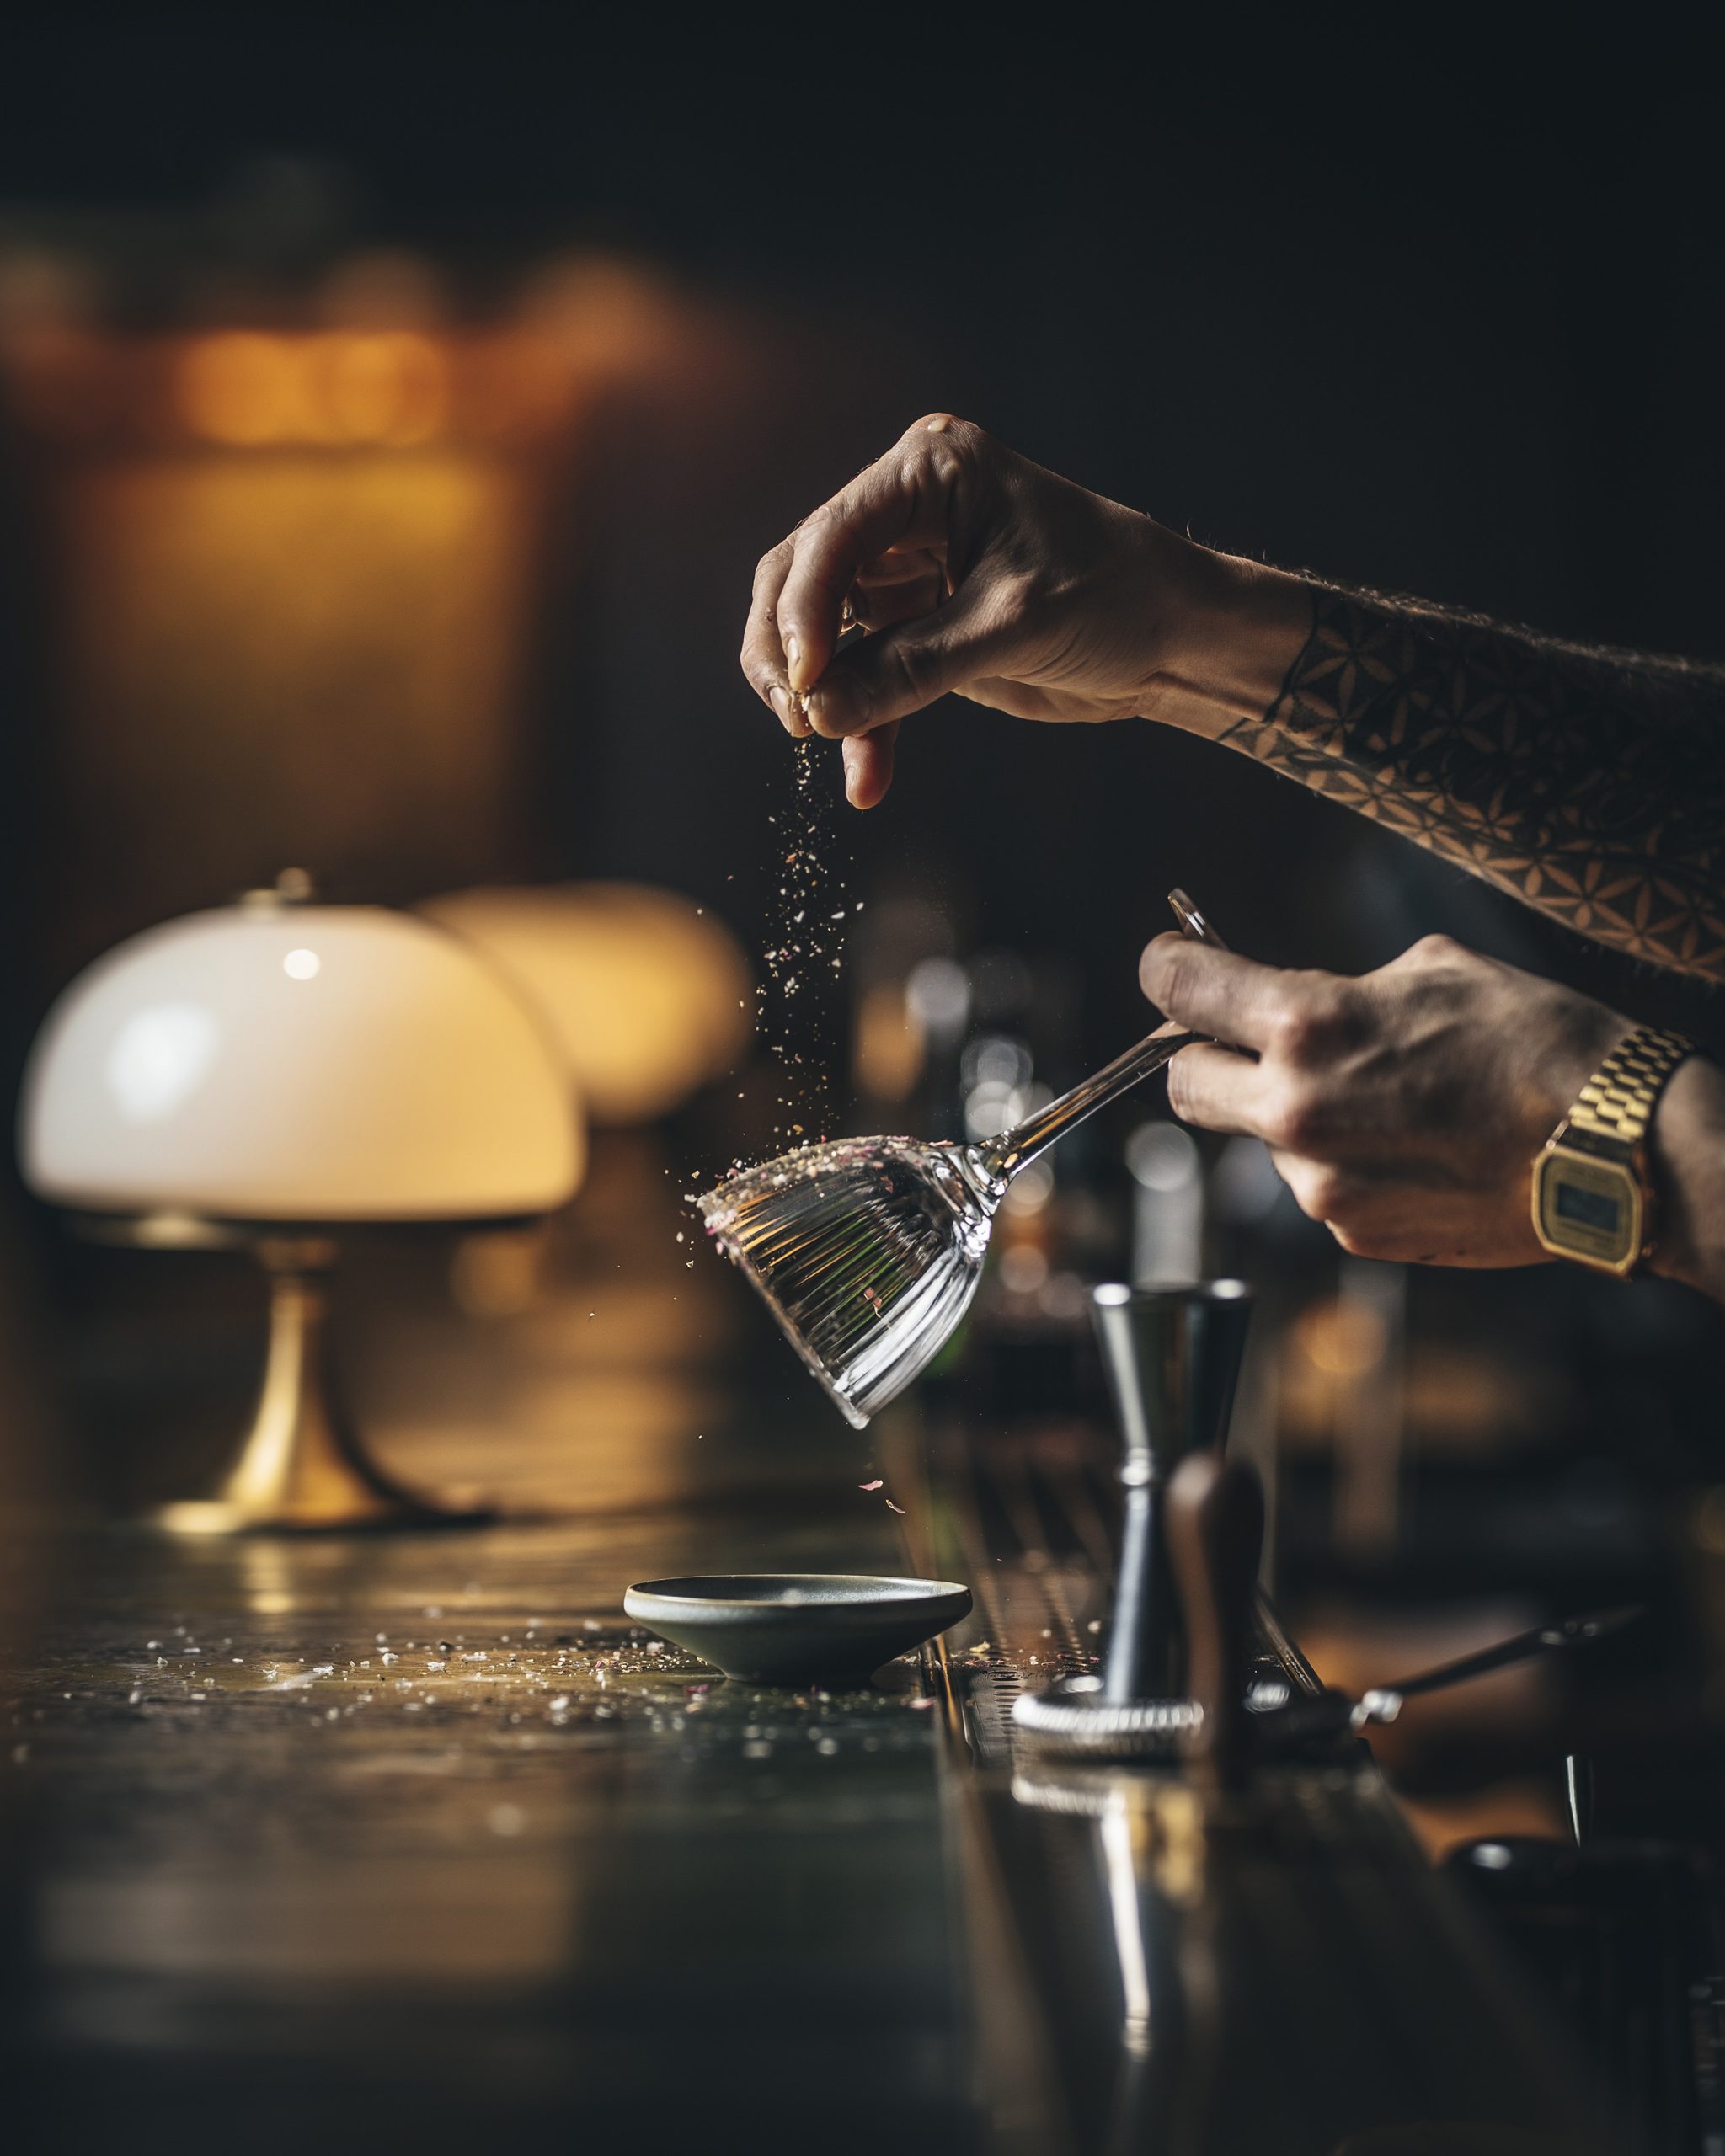 Gourmet touch: Bartender salts glass alongside ambient lamps